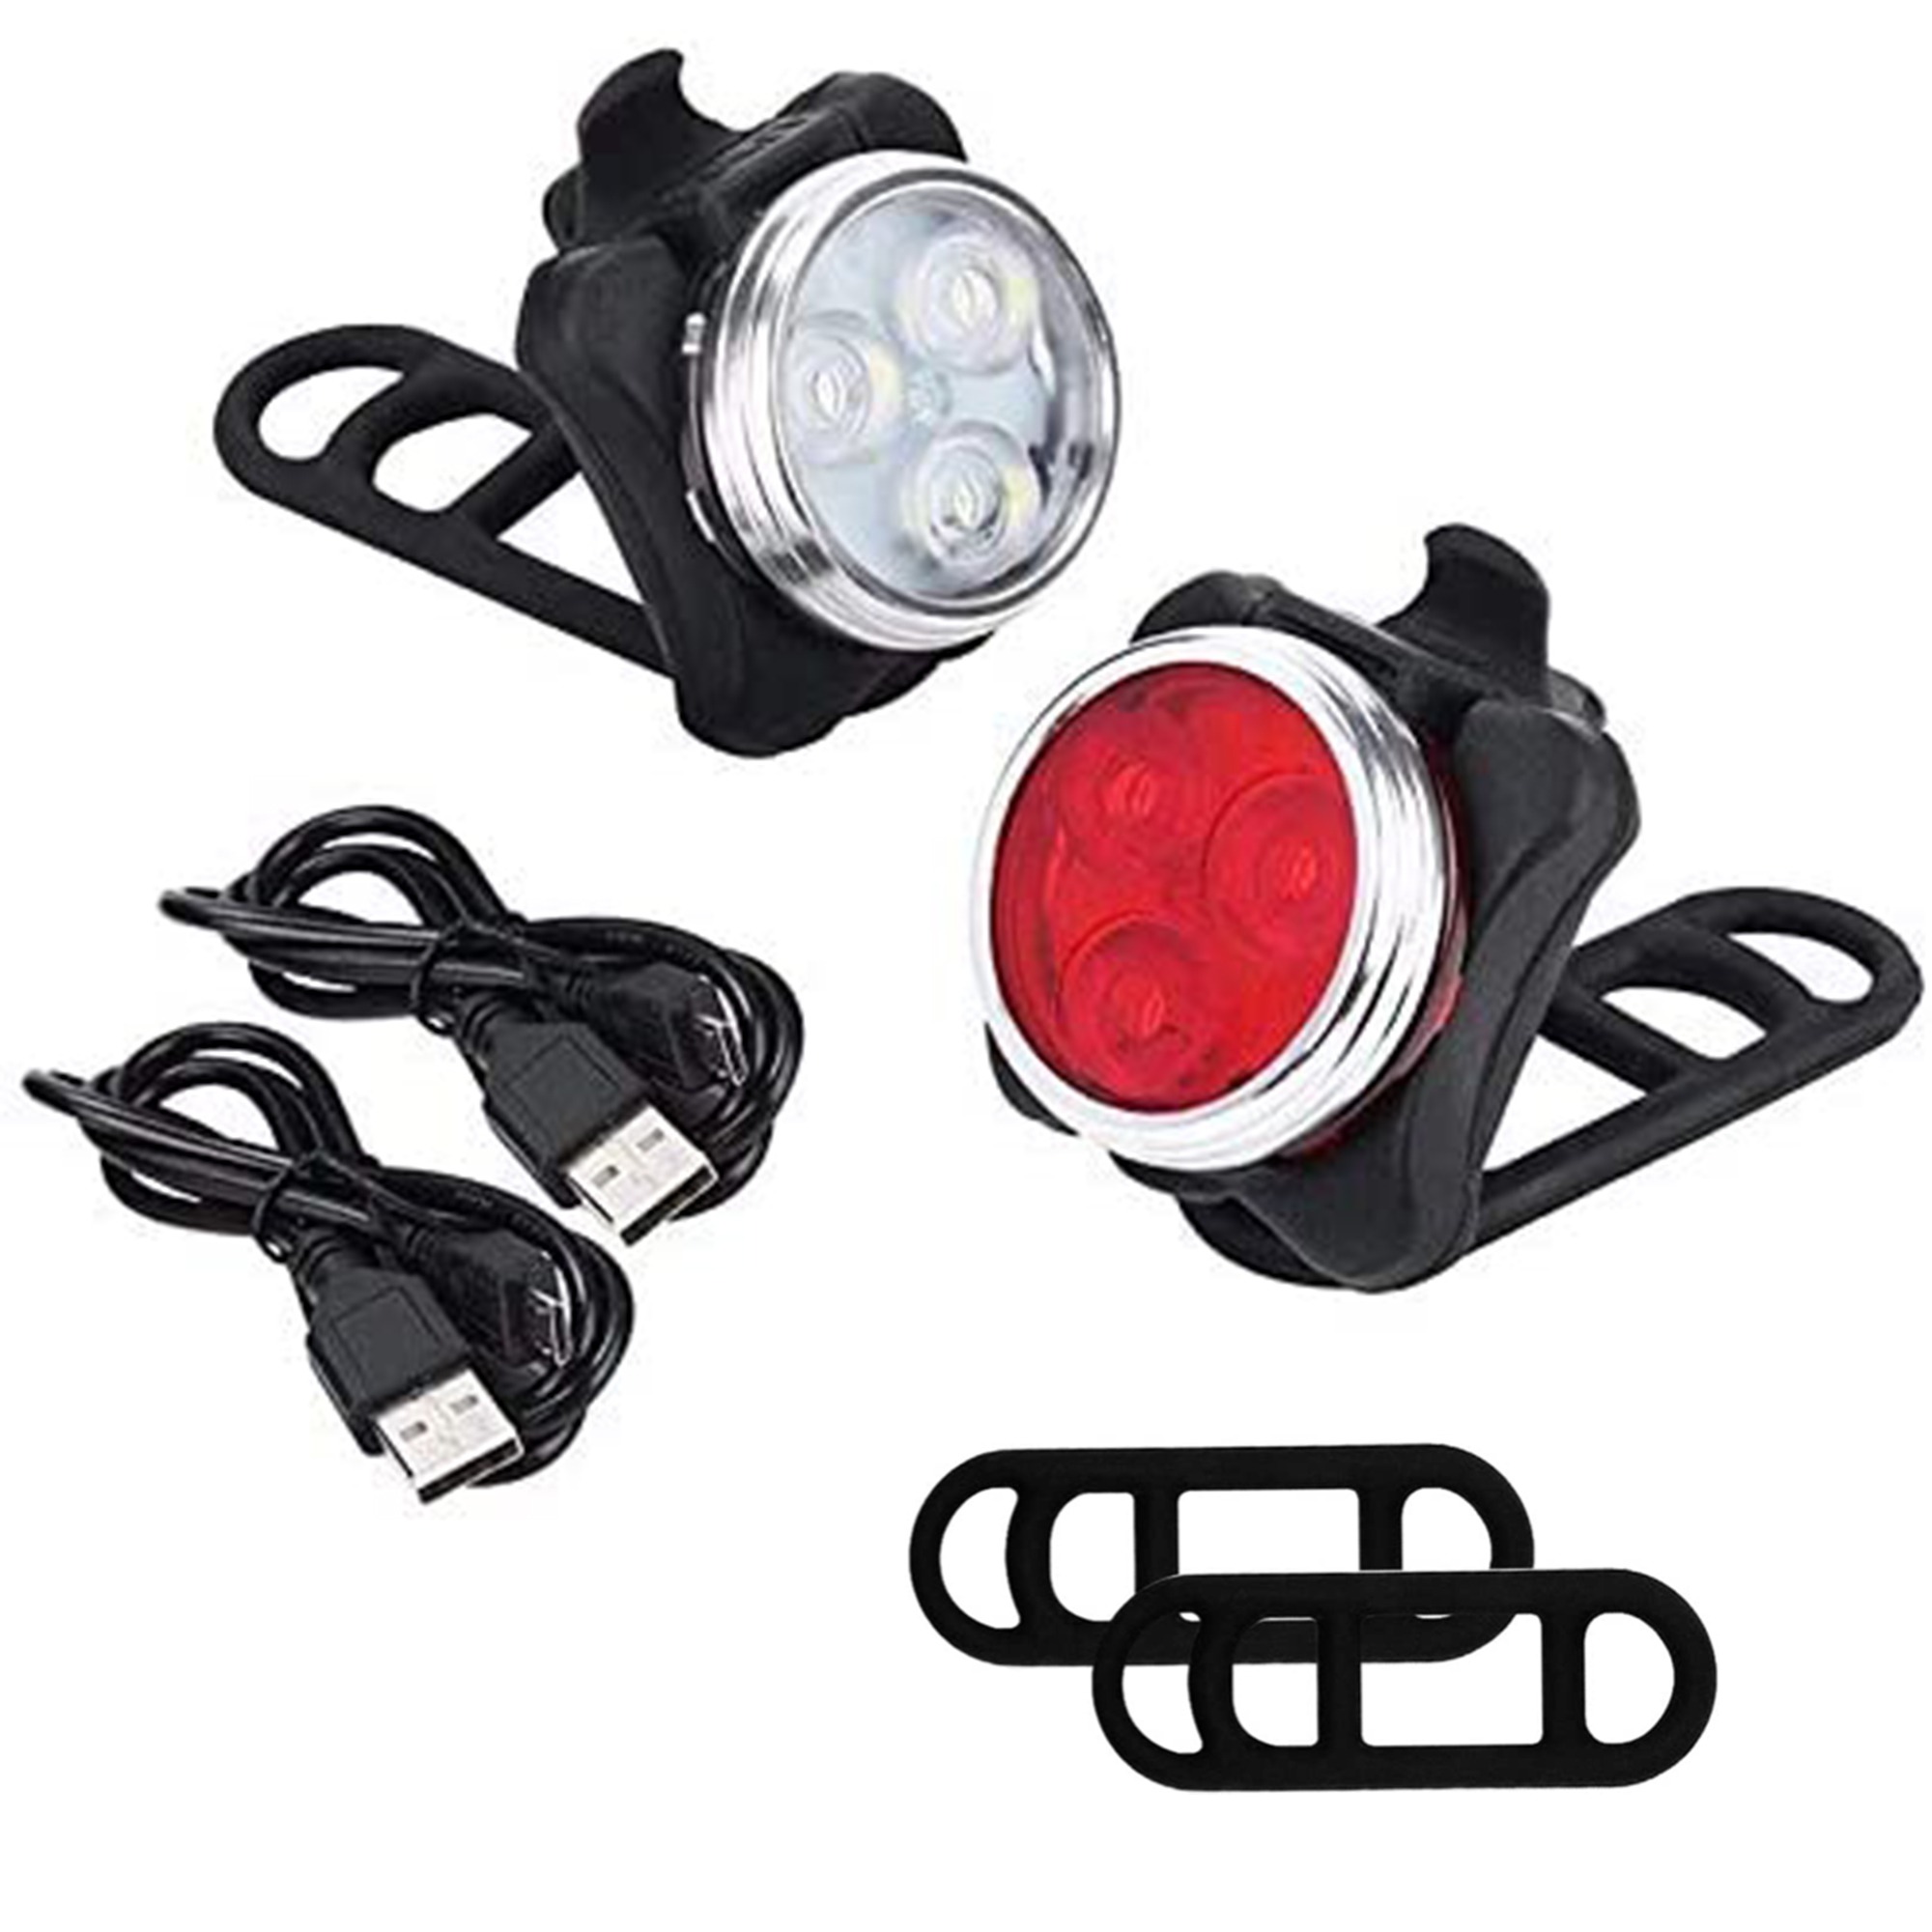 Not Included Bike Accessory Bike Front Light LED Vintage 1LED Bicycle Headlight Taillight Super Bright High Lumens Electroplate Surface Treatment with Mounting Bracket Powered by AAA Battery 